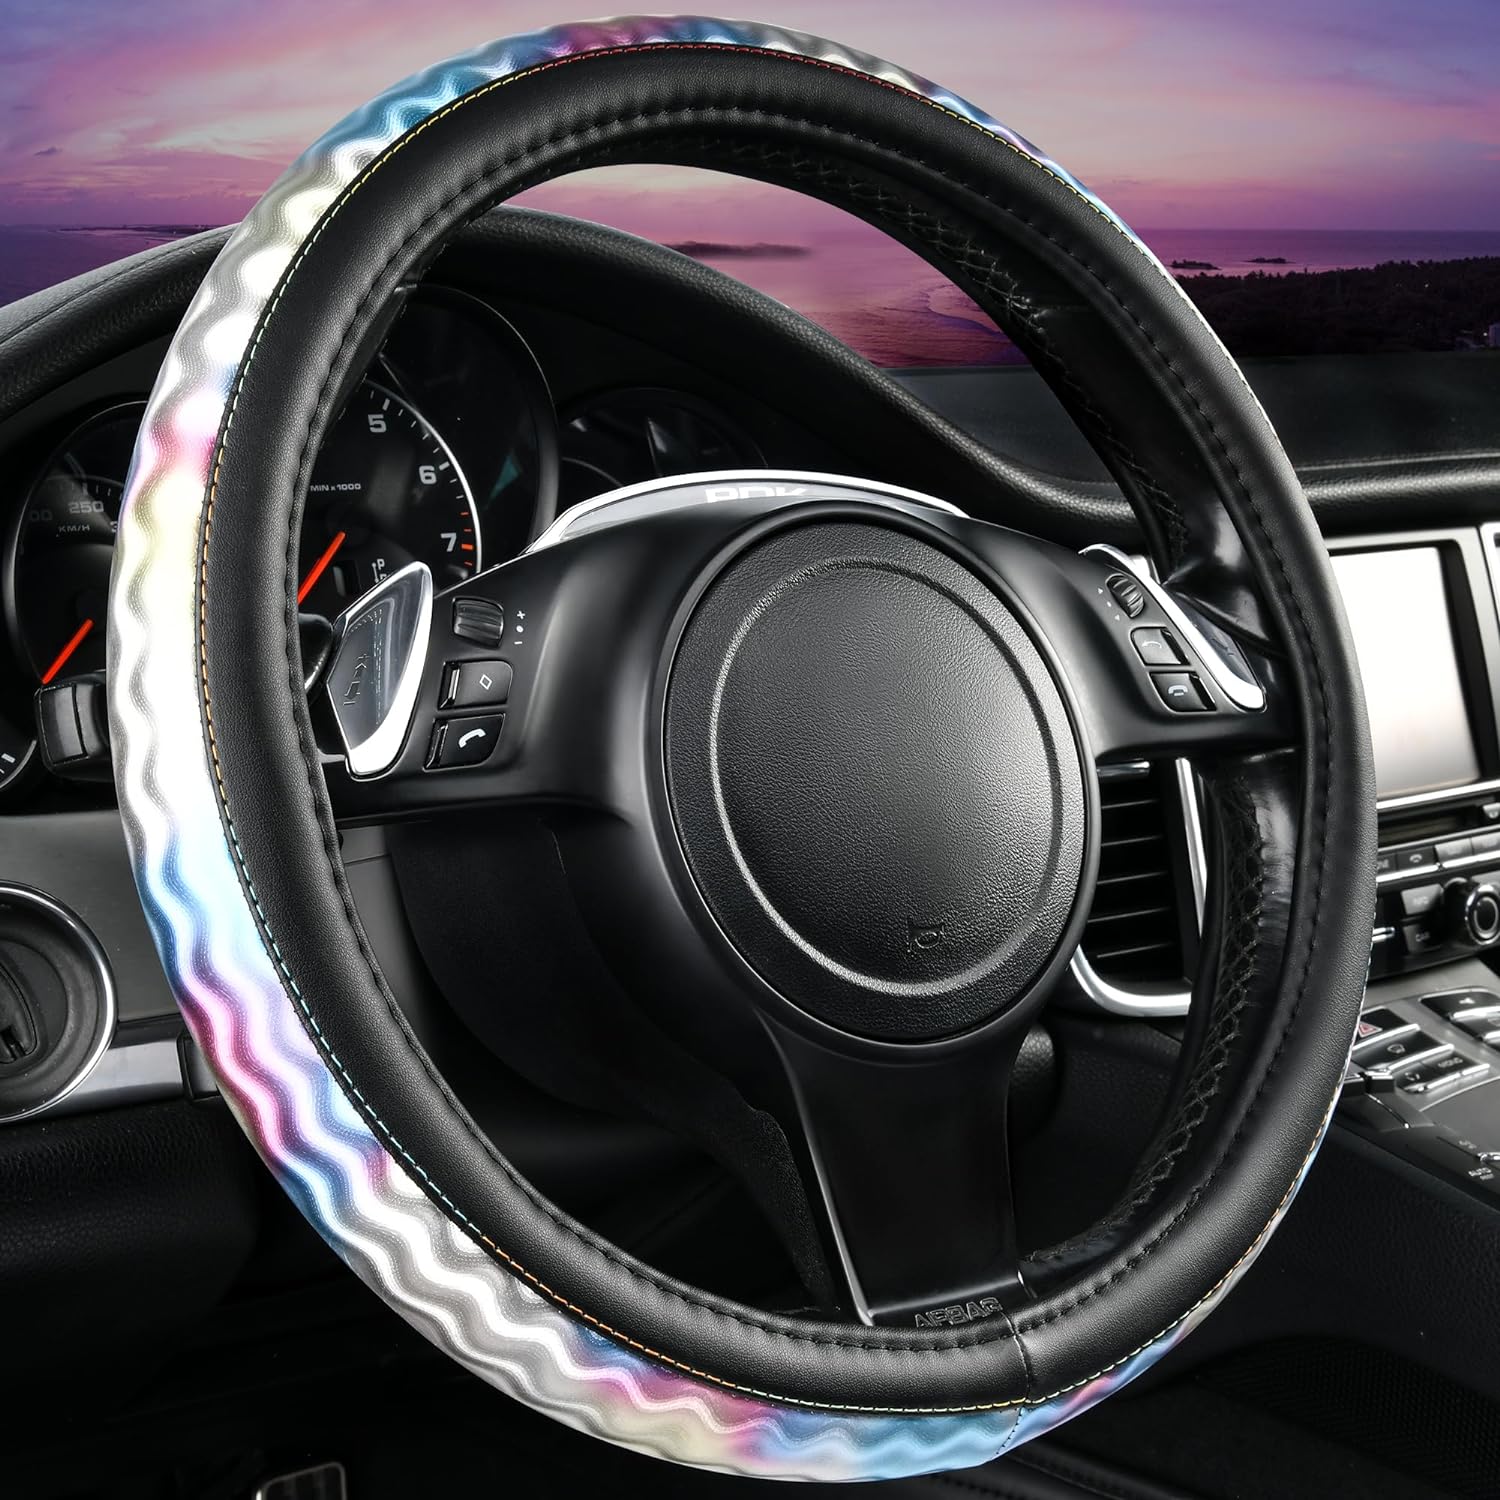 CAR PASS Steering Wheel Cover,Sporty Glossy Iridescent Reflective Leather Universal Fit Steering Wheel Covers,Fit for 14.5-15 inchs Car,Truck,SUV,sedans (Black)